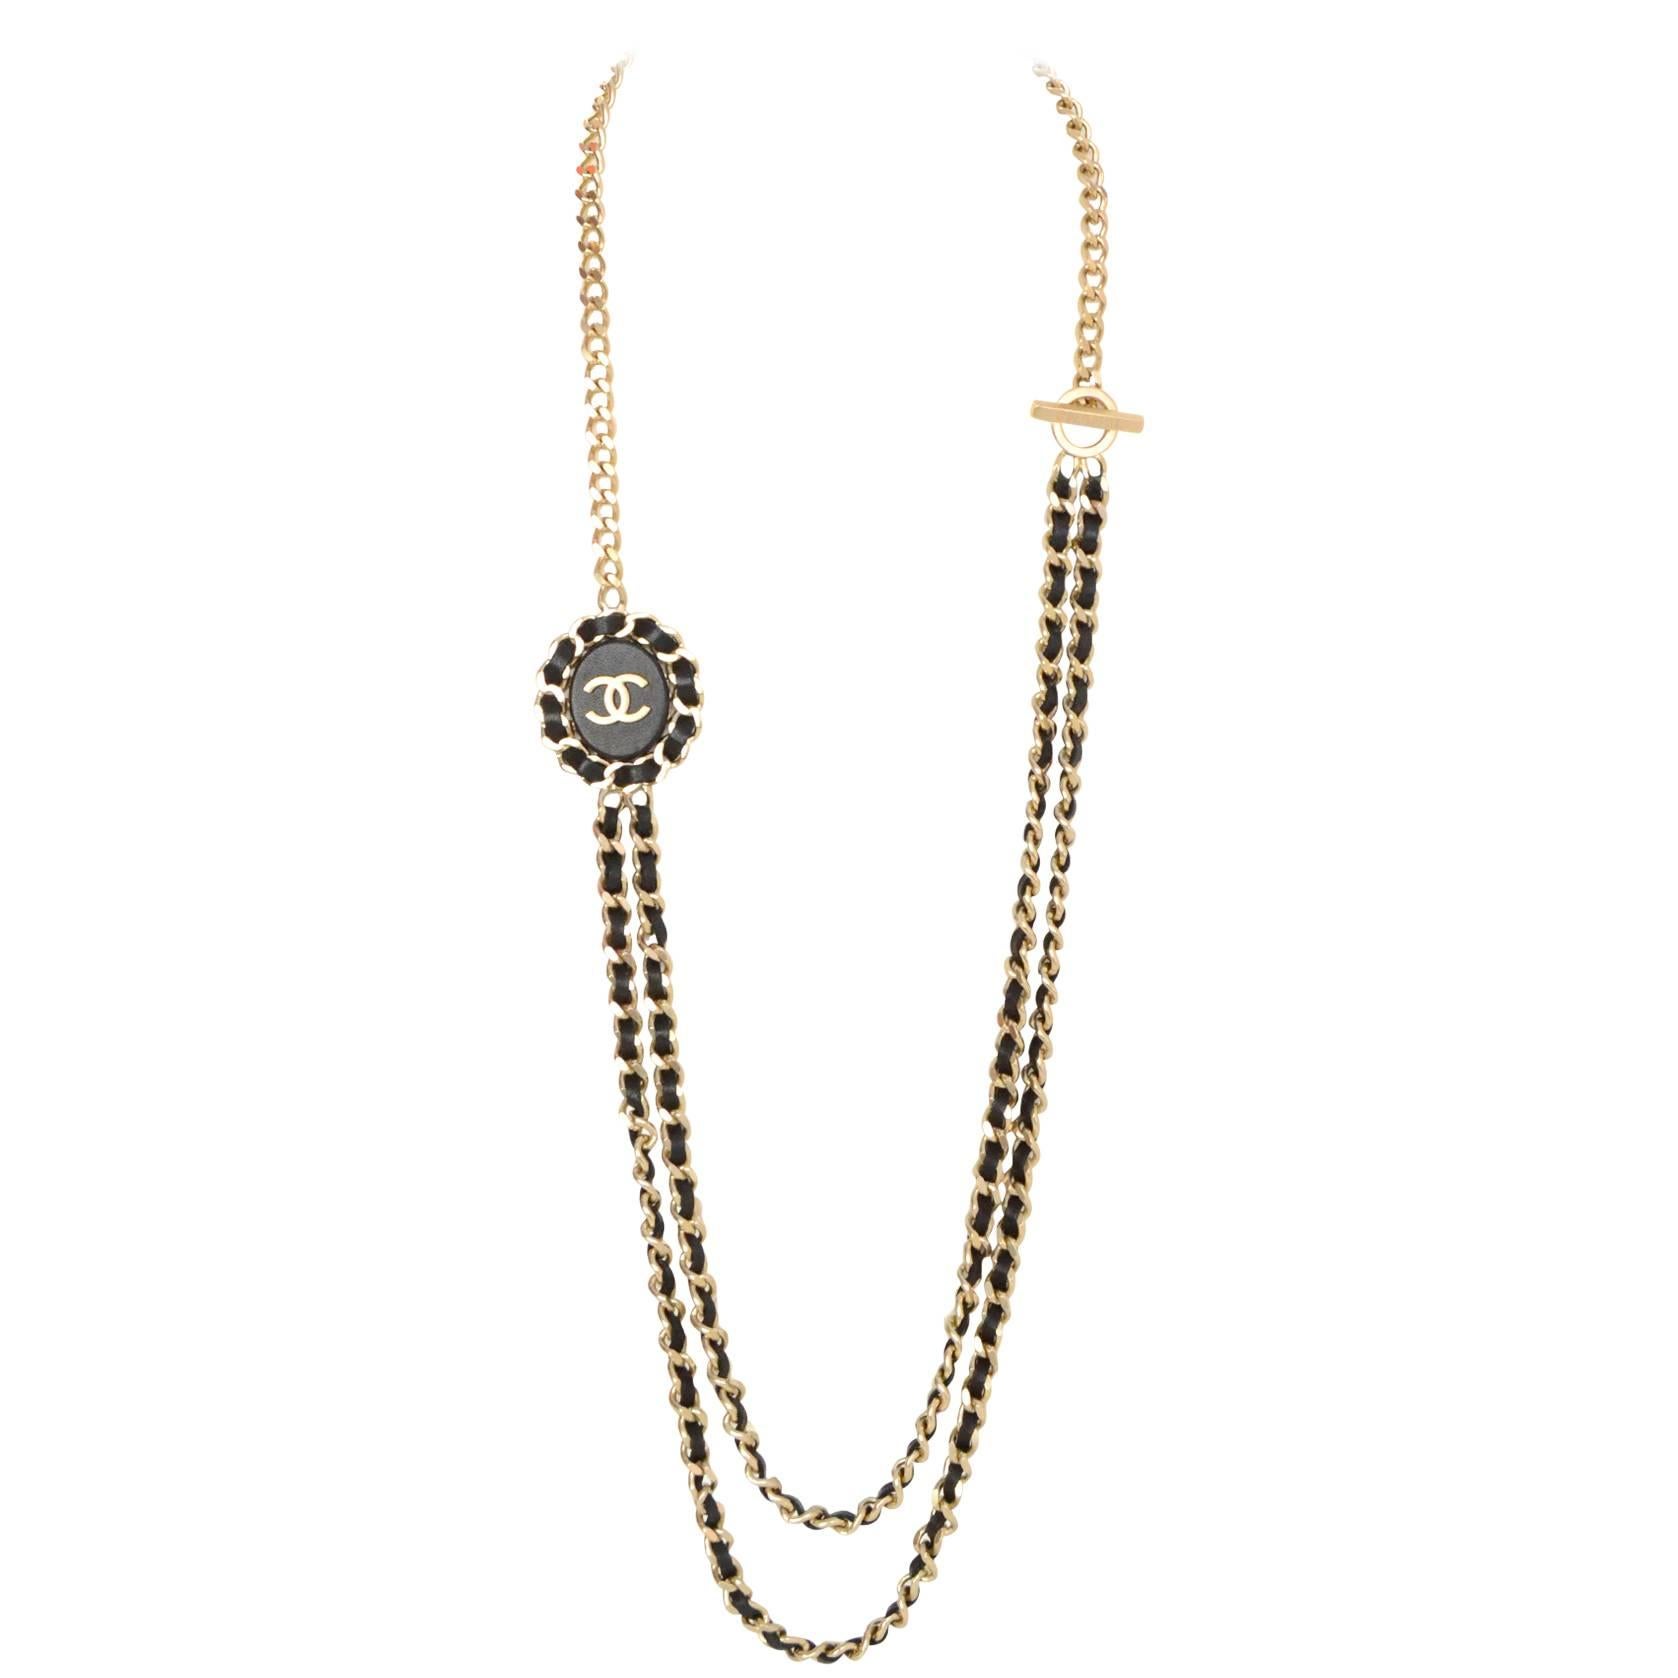 Chanel 2016 Goldtone and Black Leather Chain-Link Necklace